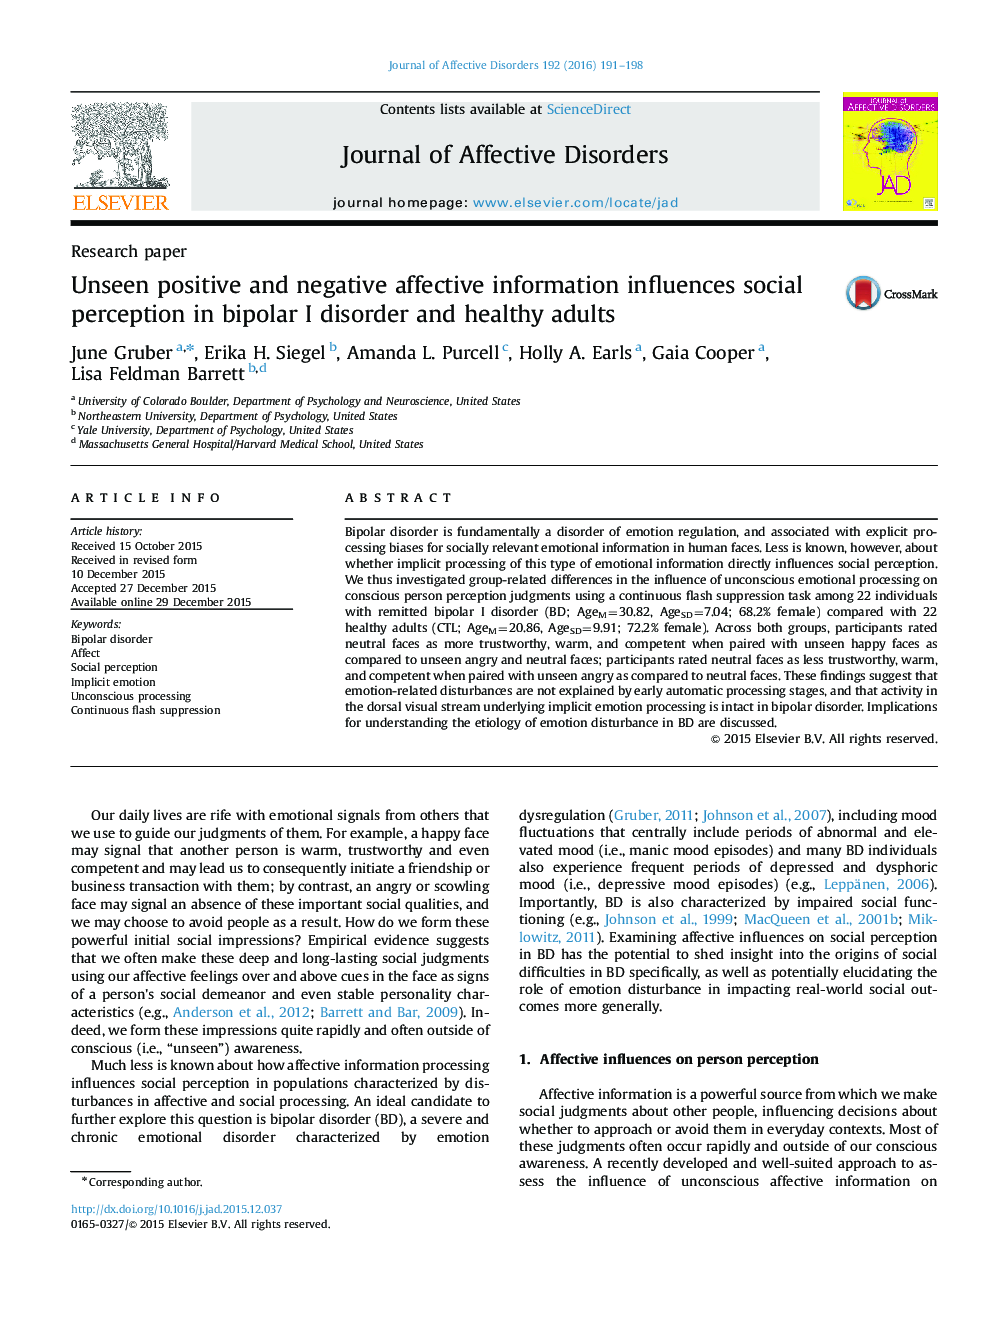 Unseen positive and negative affective information influences social perception in bipolar I disorder and healthy adults